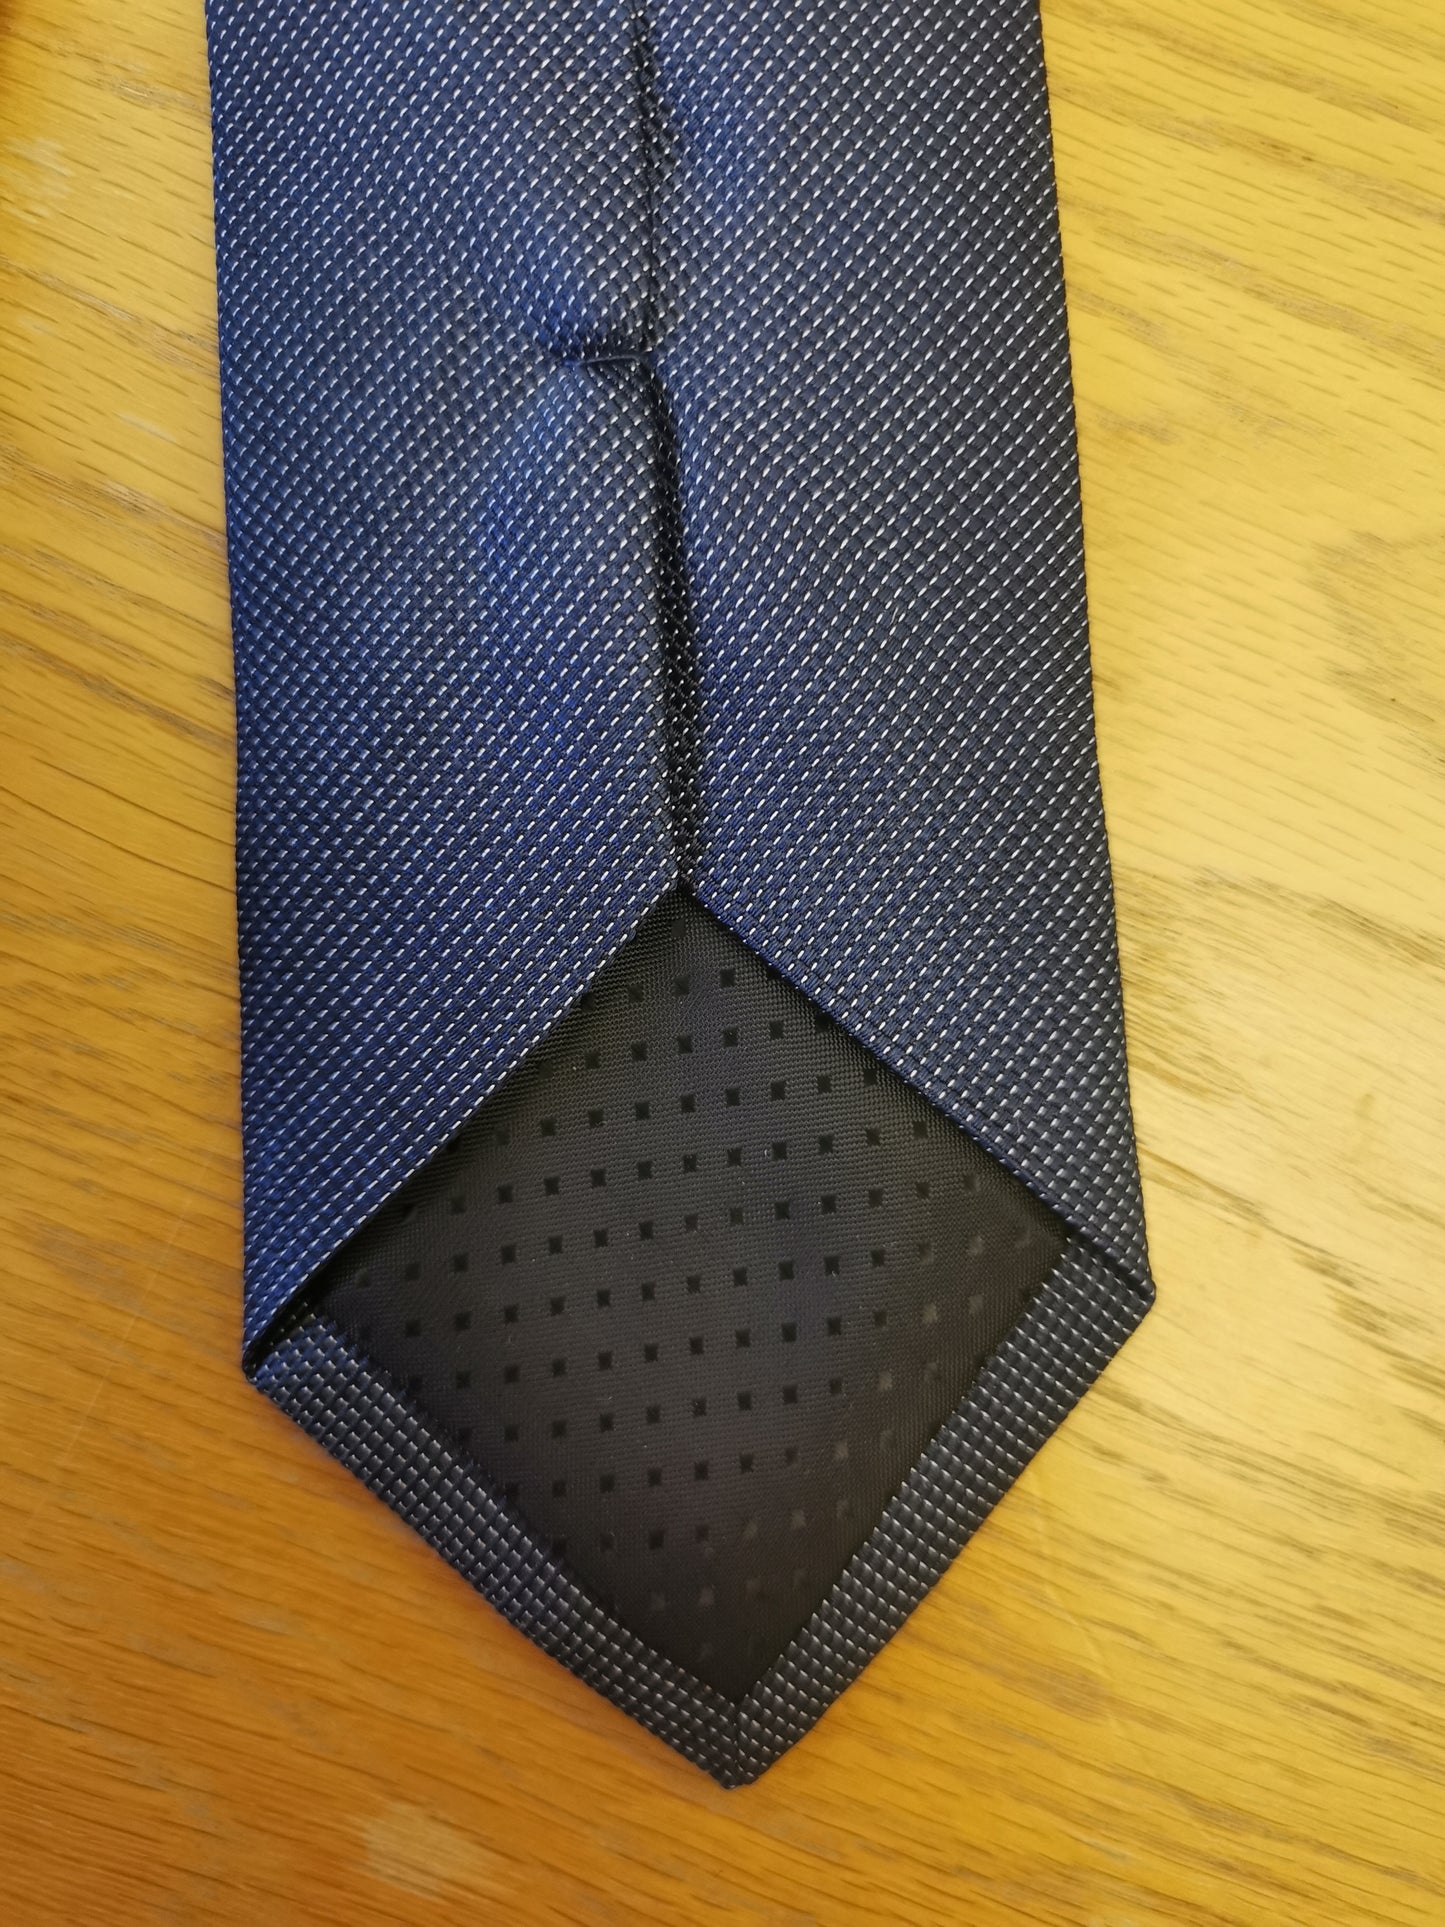 100% silk French Connection tie